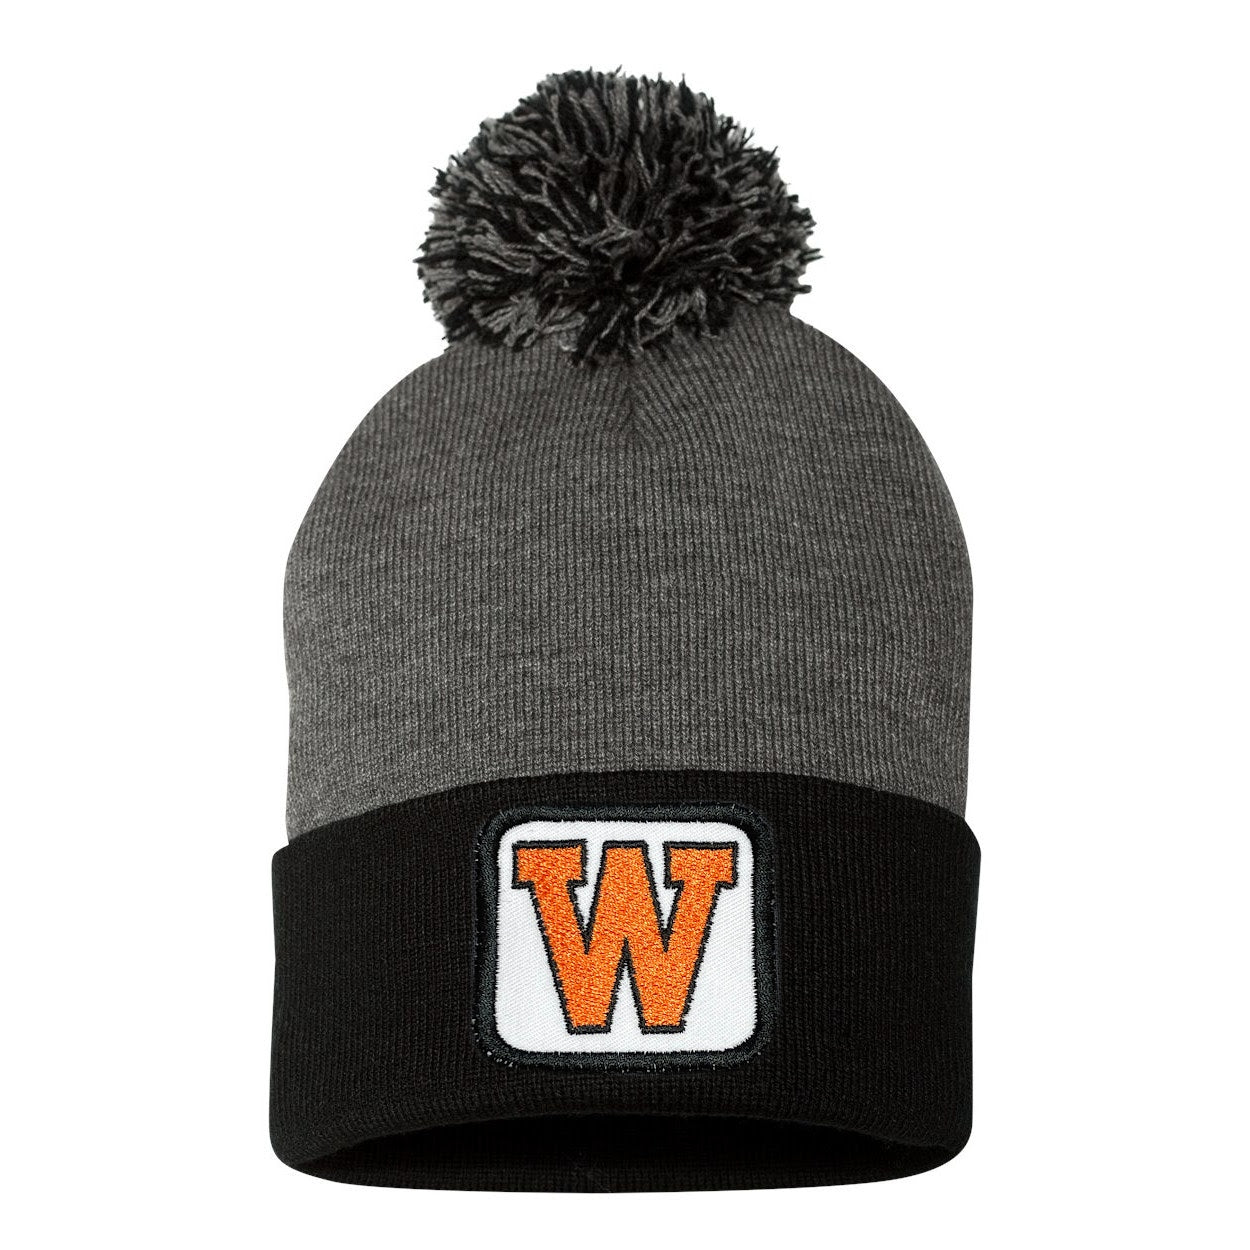 White Square Patched West De Pere Logo Beanies